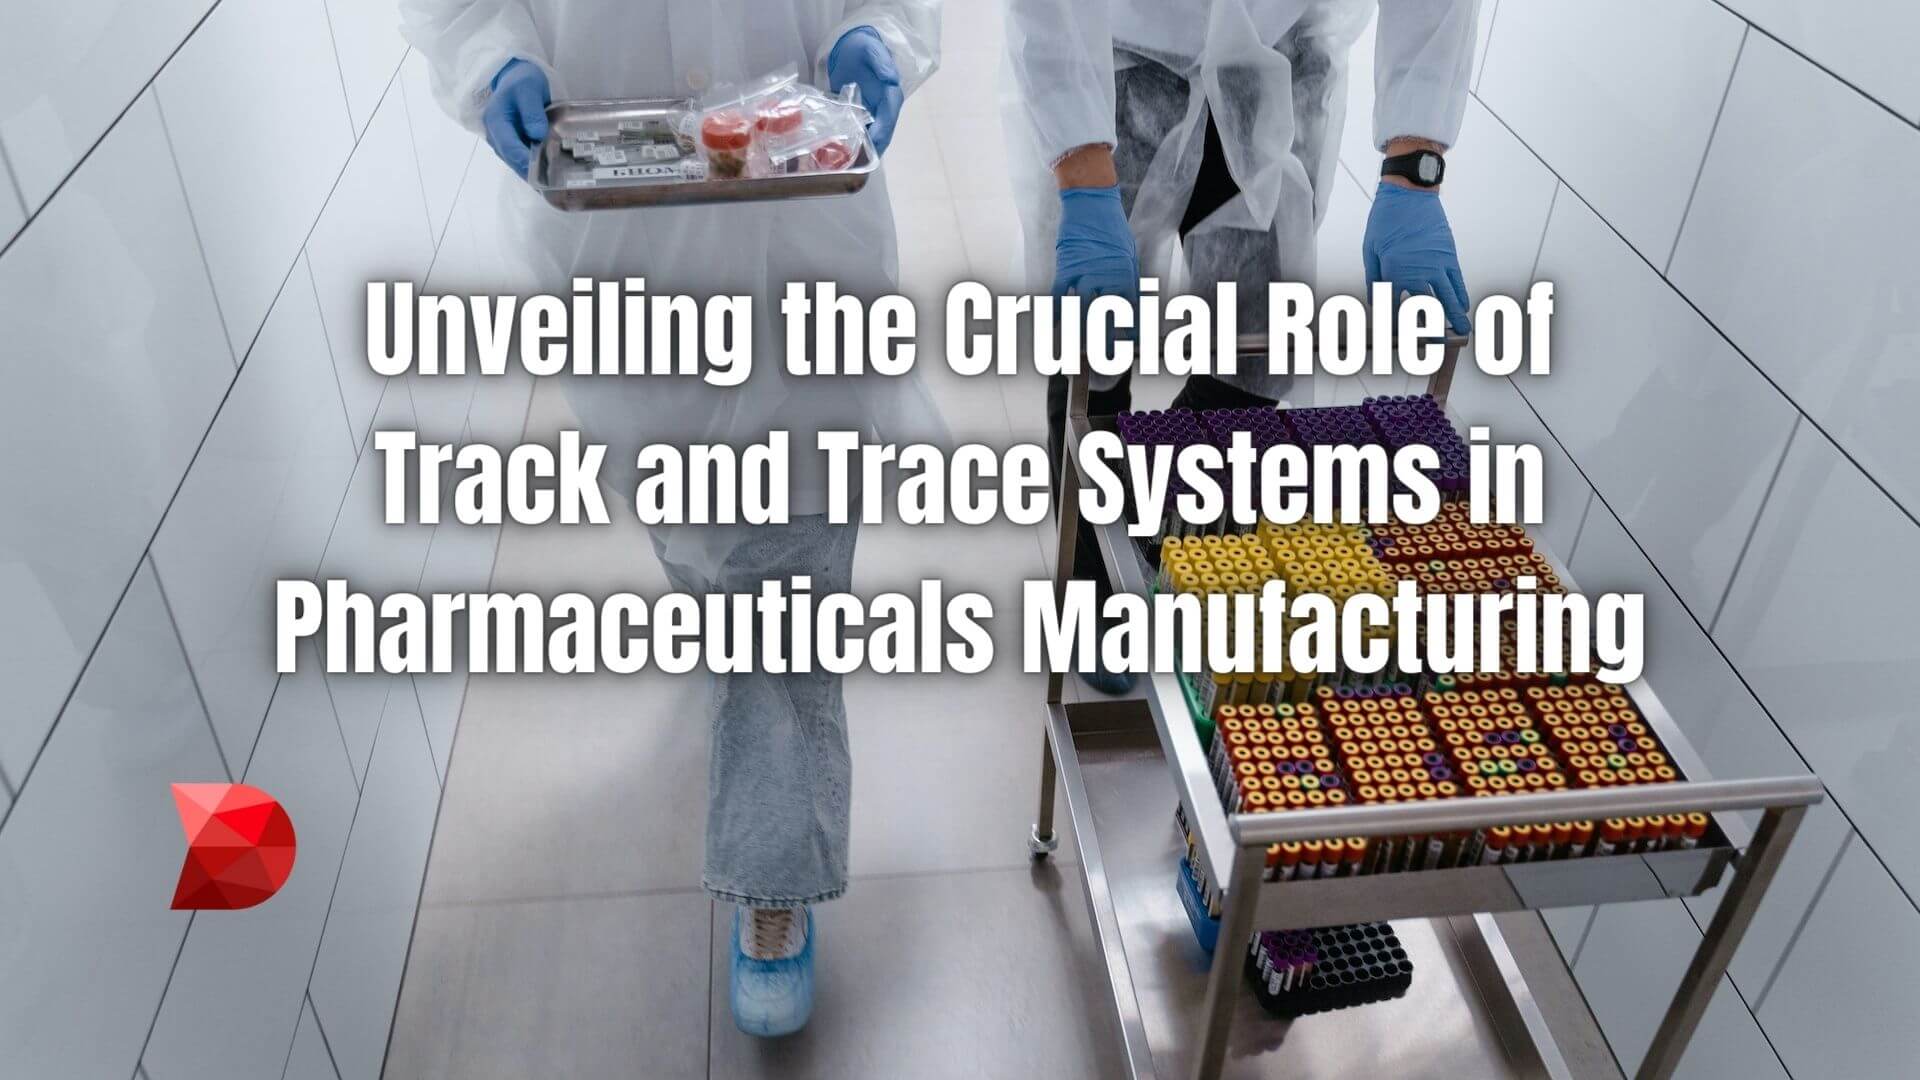 Track and Trace in the pharmaceutical industry refers to the approach of recording the journey and keeping tabs on the products. Learn more!